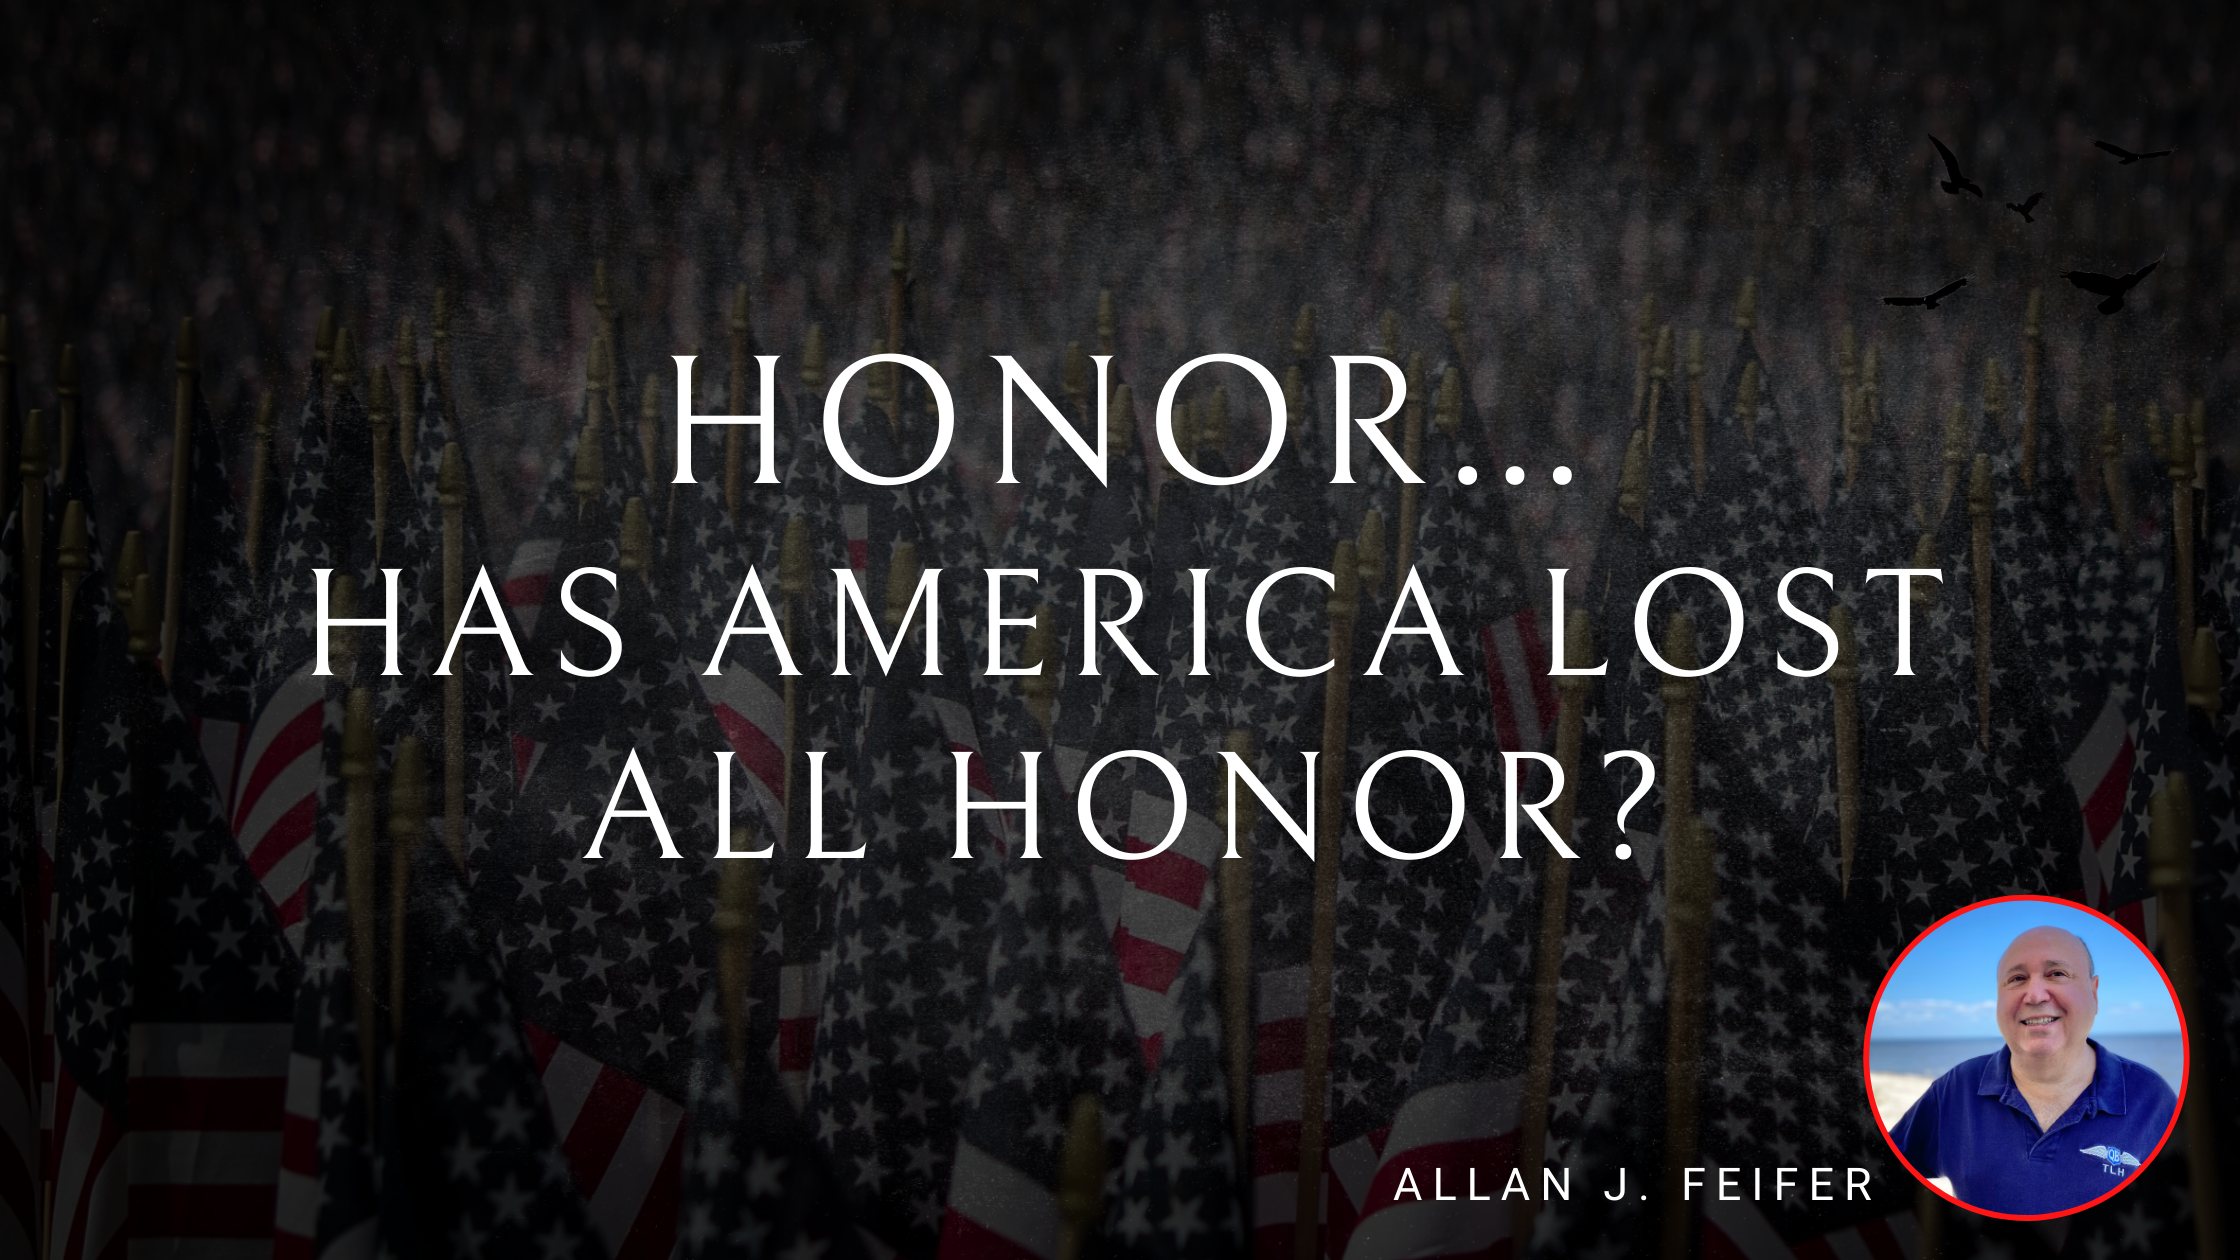 Honor… Has America lost all honor?